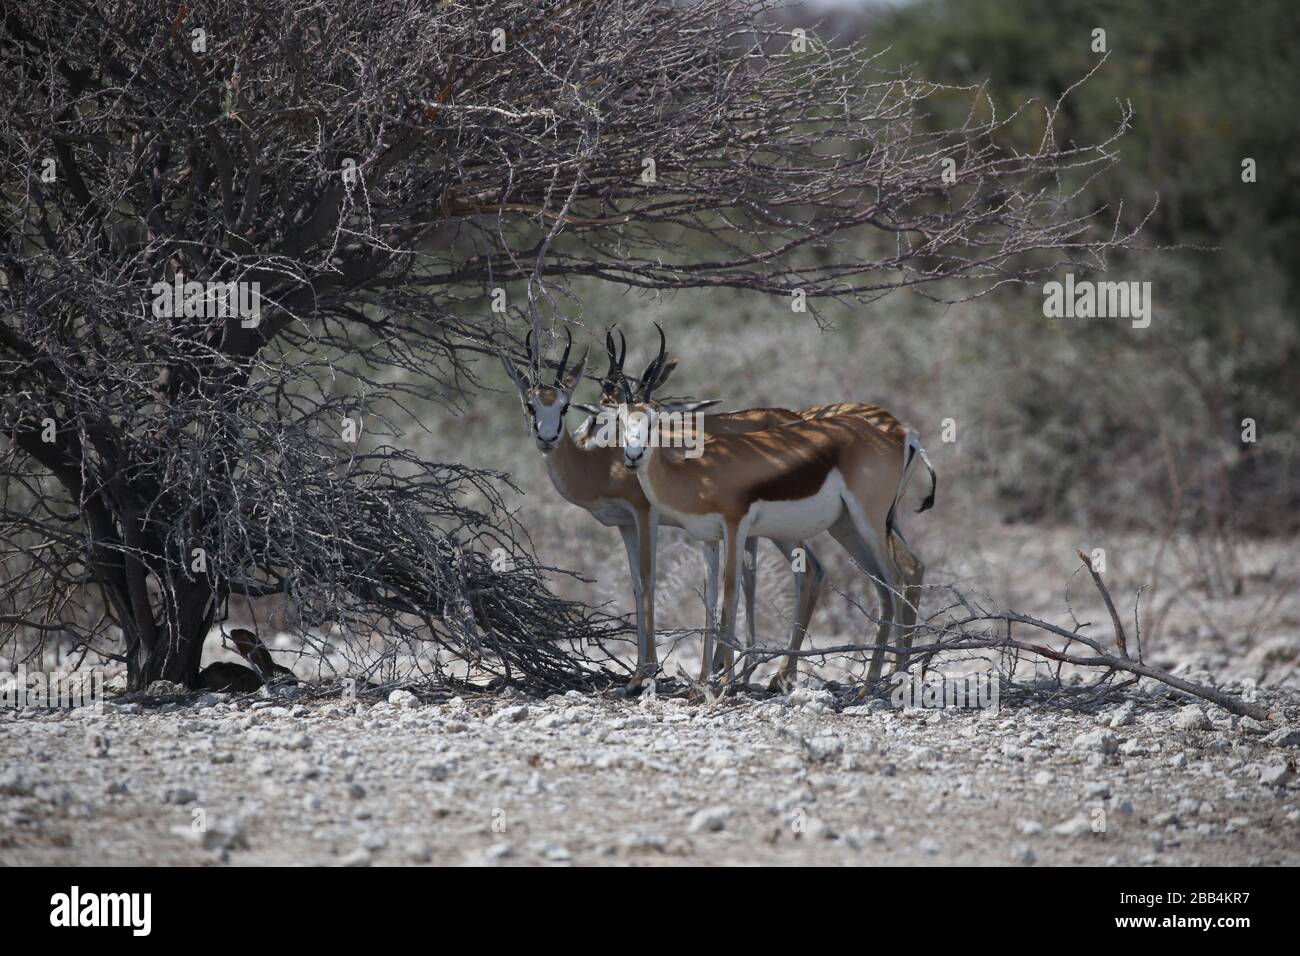 Two juvenile male impala deers shelter under a tree from the hot sun on the Etosha plains in Namibia Stock Photo